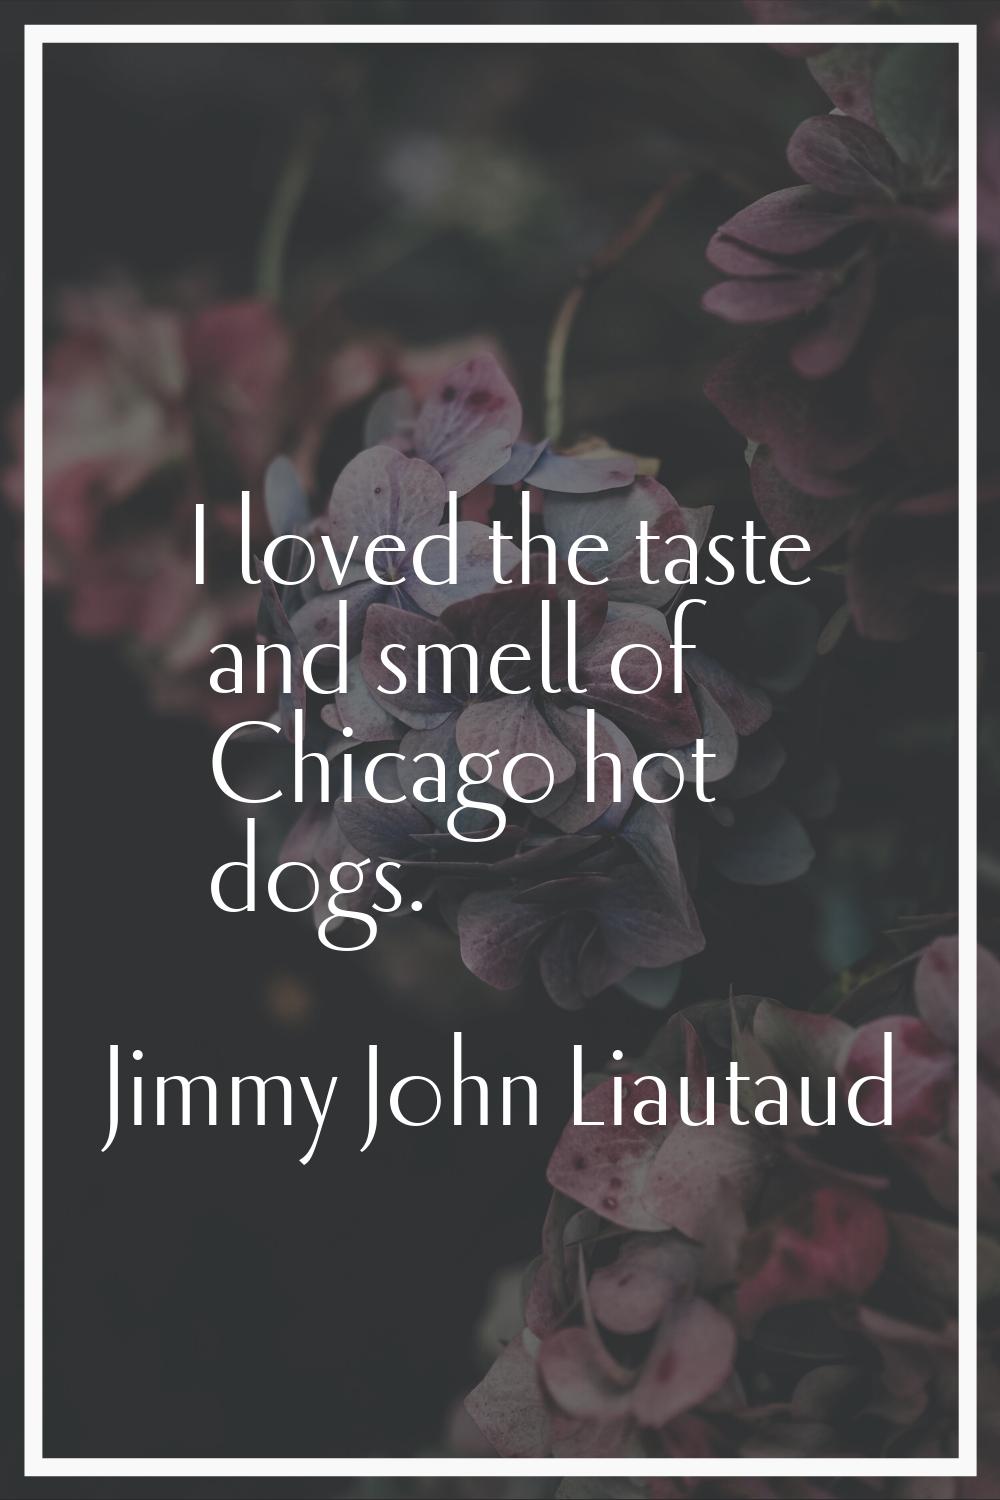 I loved the taste and smell of Chicago hot dogs.